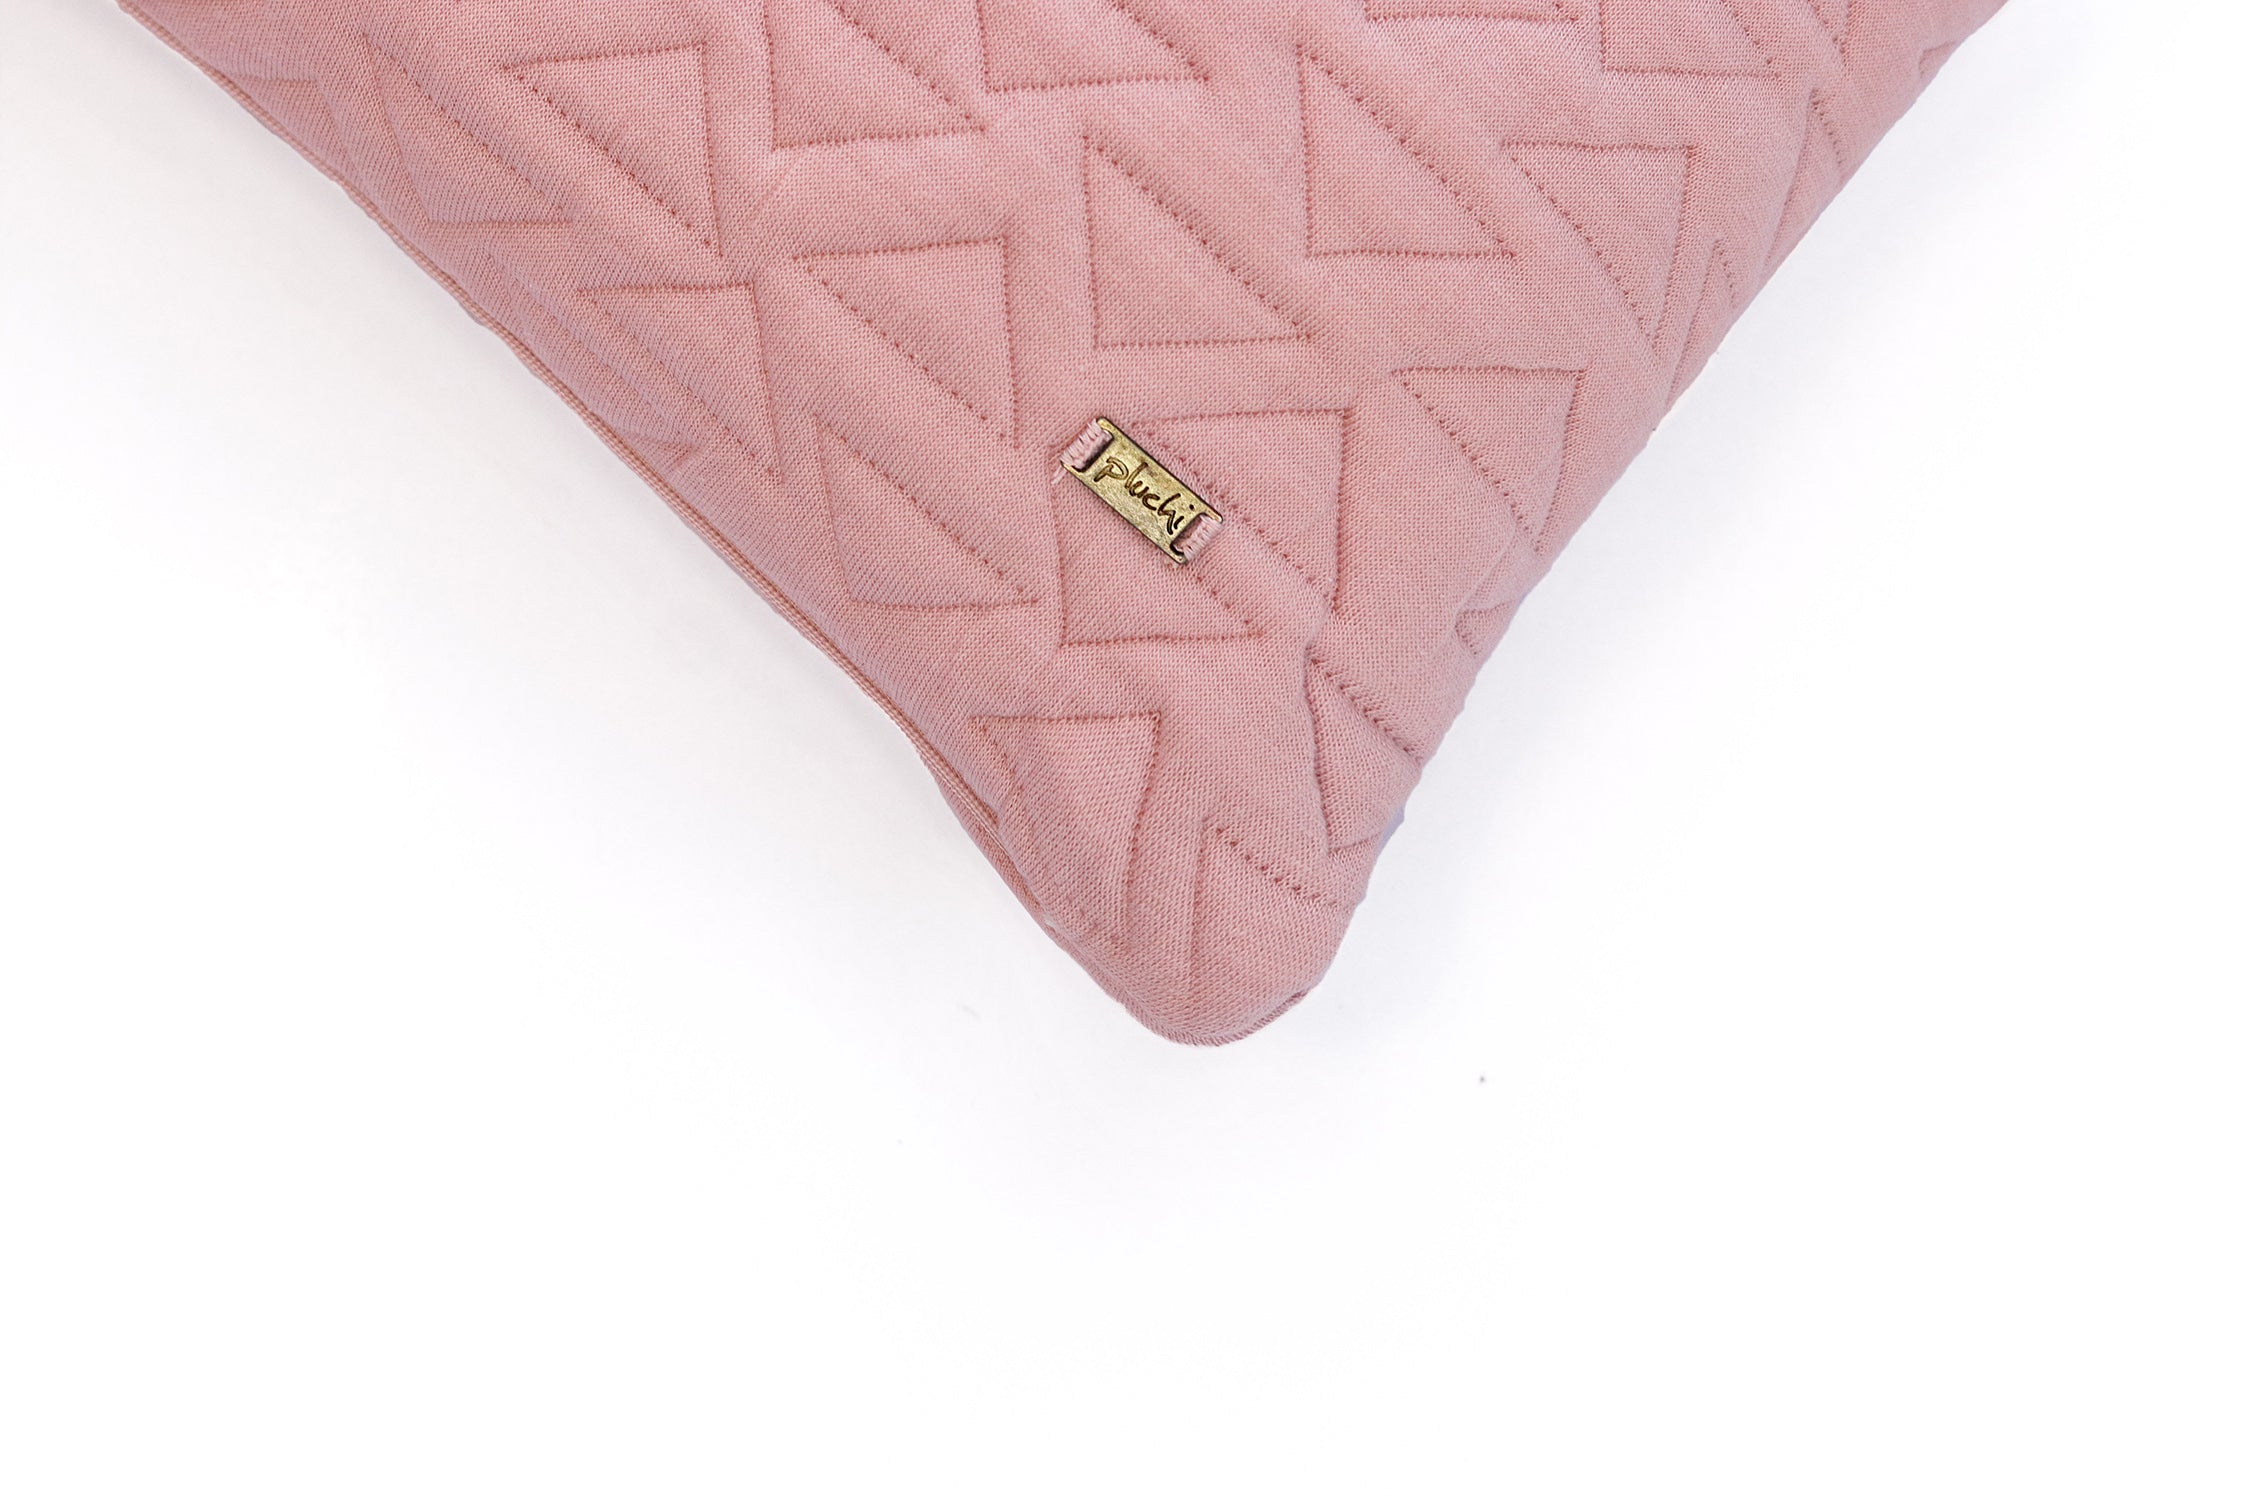 Totit - Cotton Knitted Cushion Cover (Cameo Pink Color)